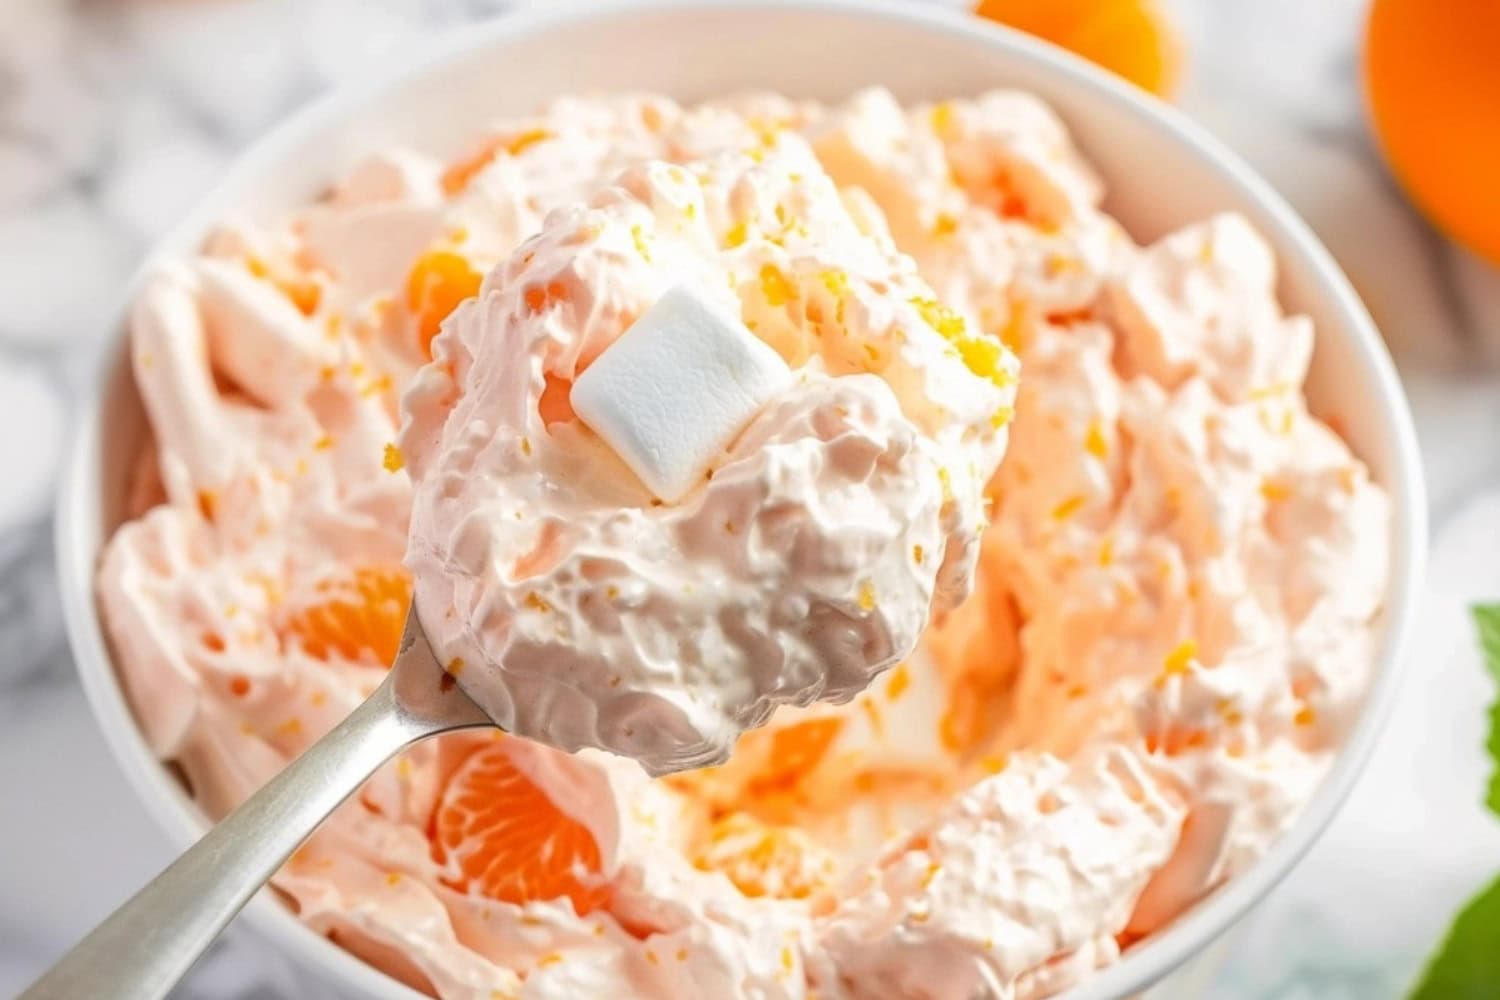 Orange fluff salad in a white bowl scooped with a spoon.